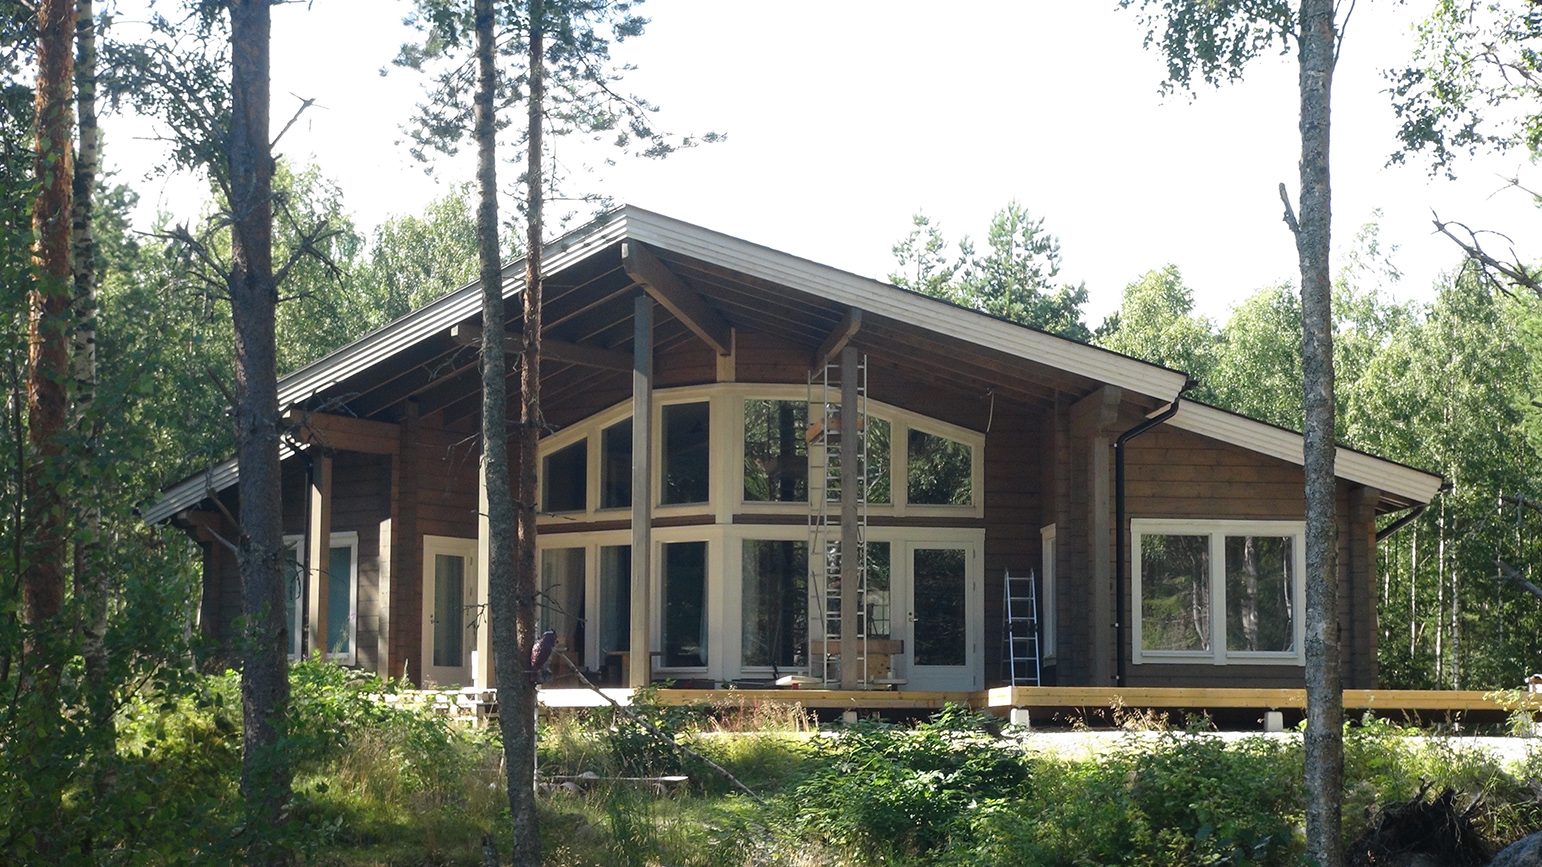 Energy Self Sufficient: a Modern Home Without the Grid in Finland -  Energiaa online newspaper